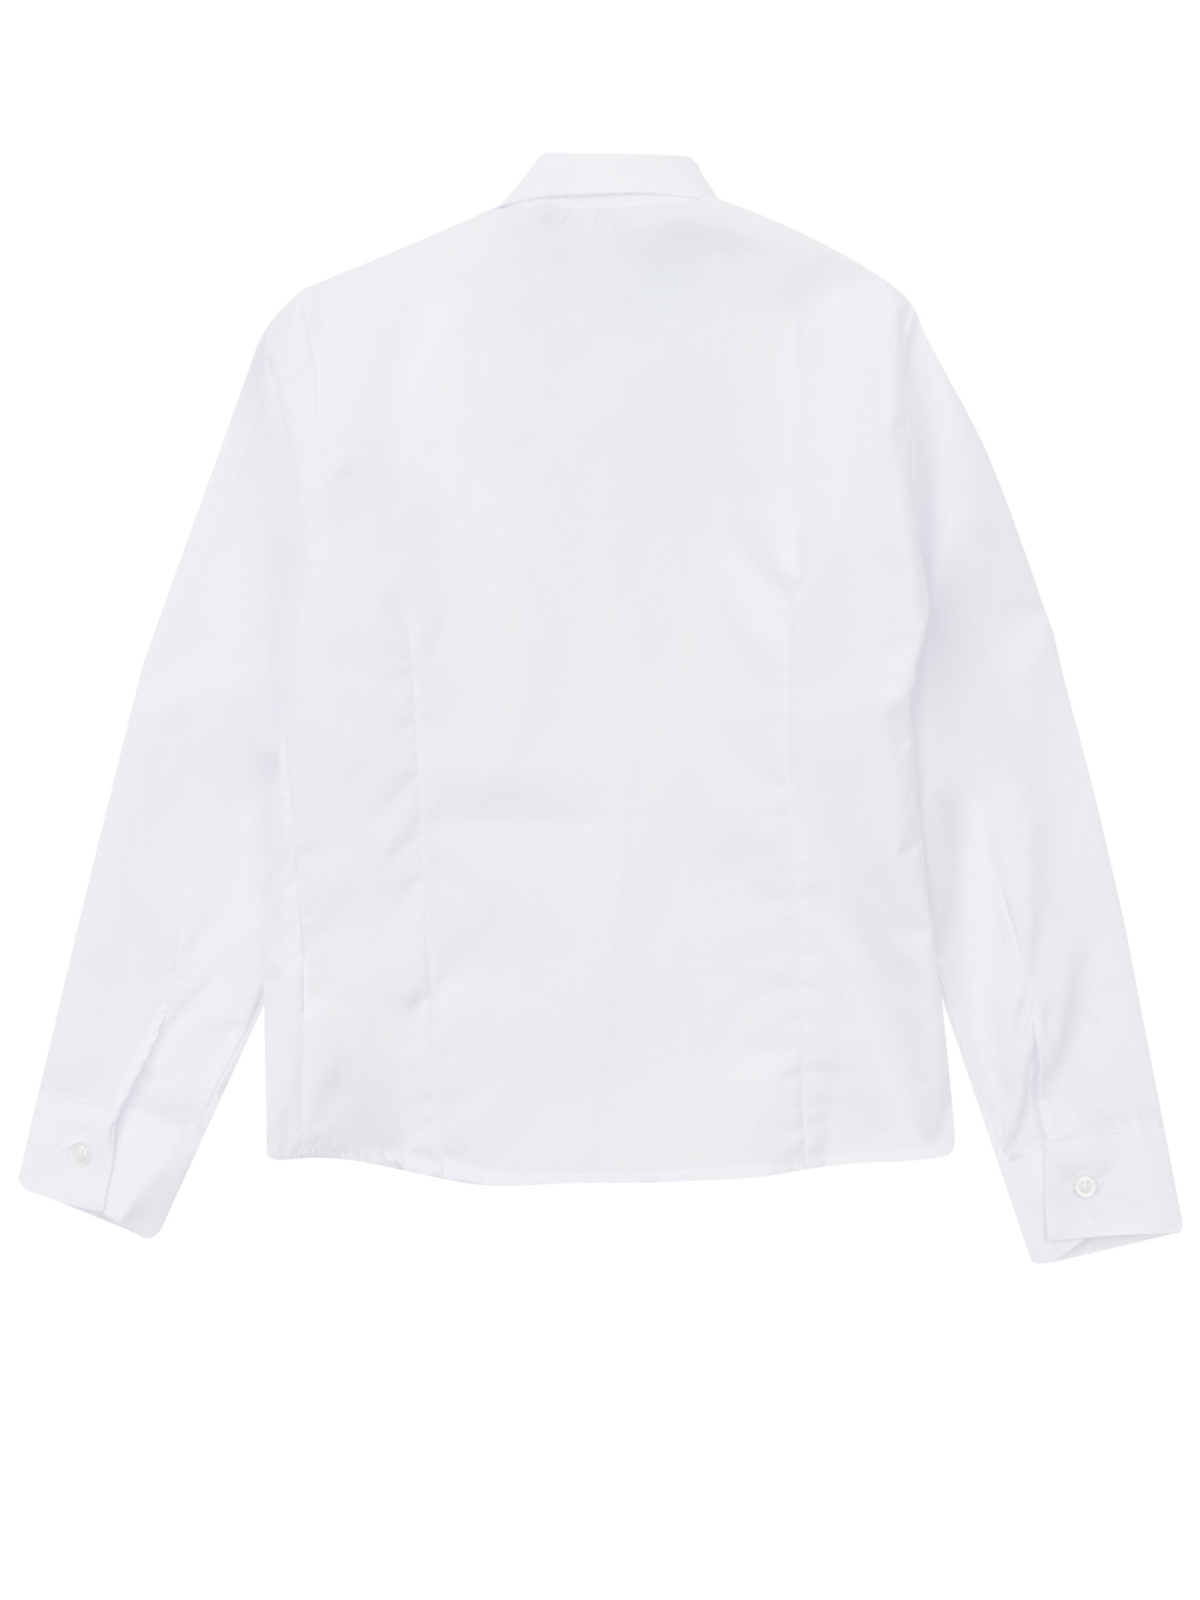 Essential School Uniform White Long Sleeve Shirt by Kids Couture